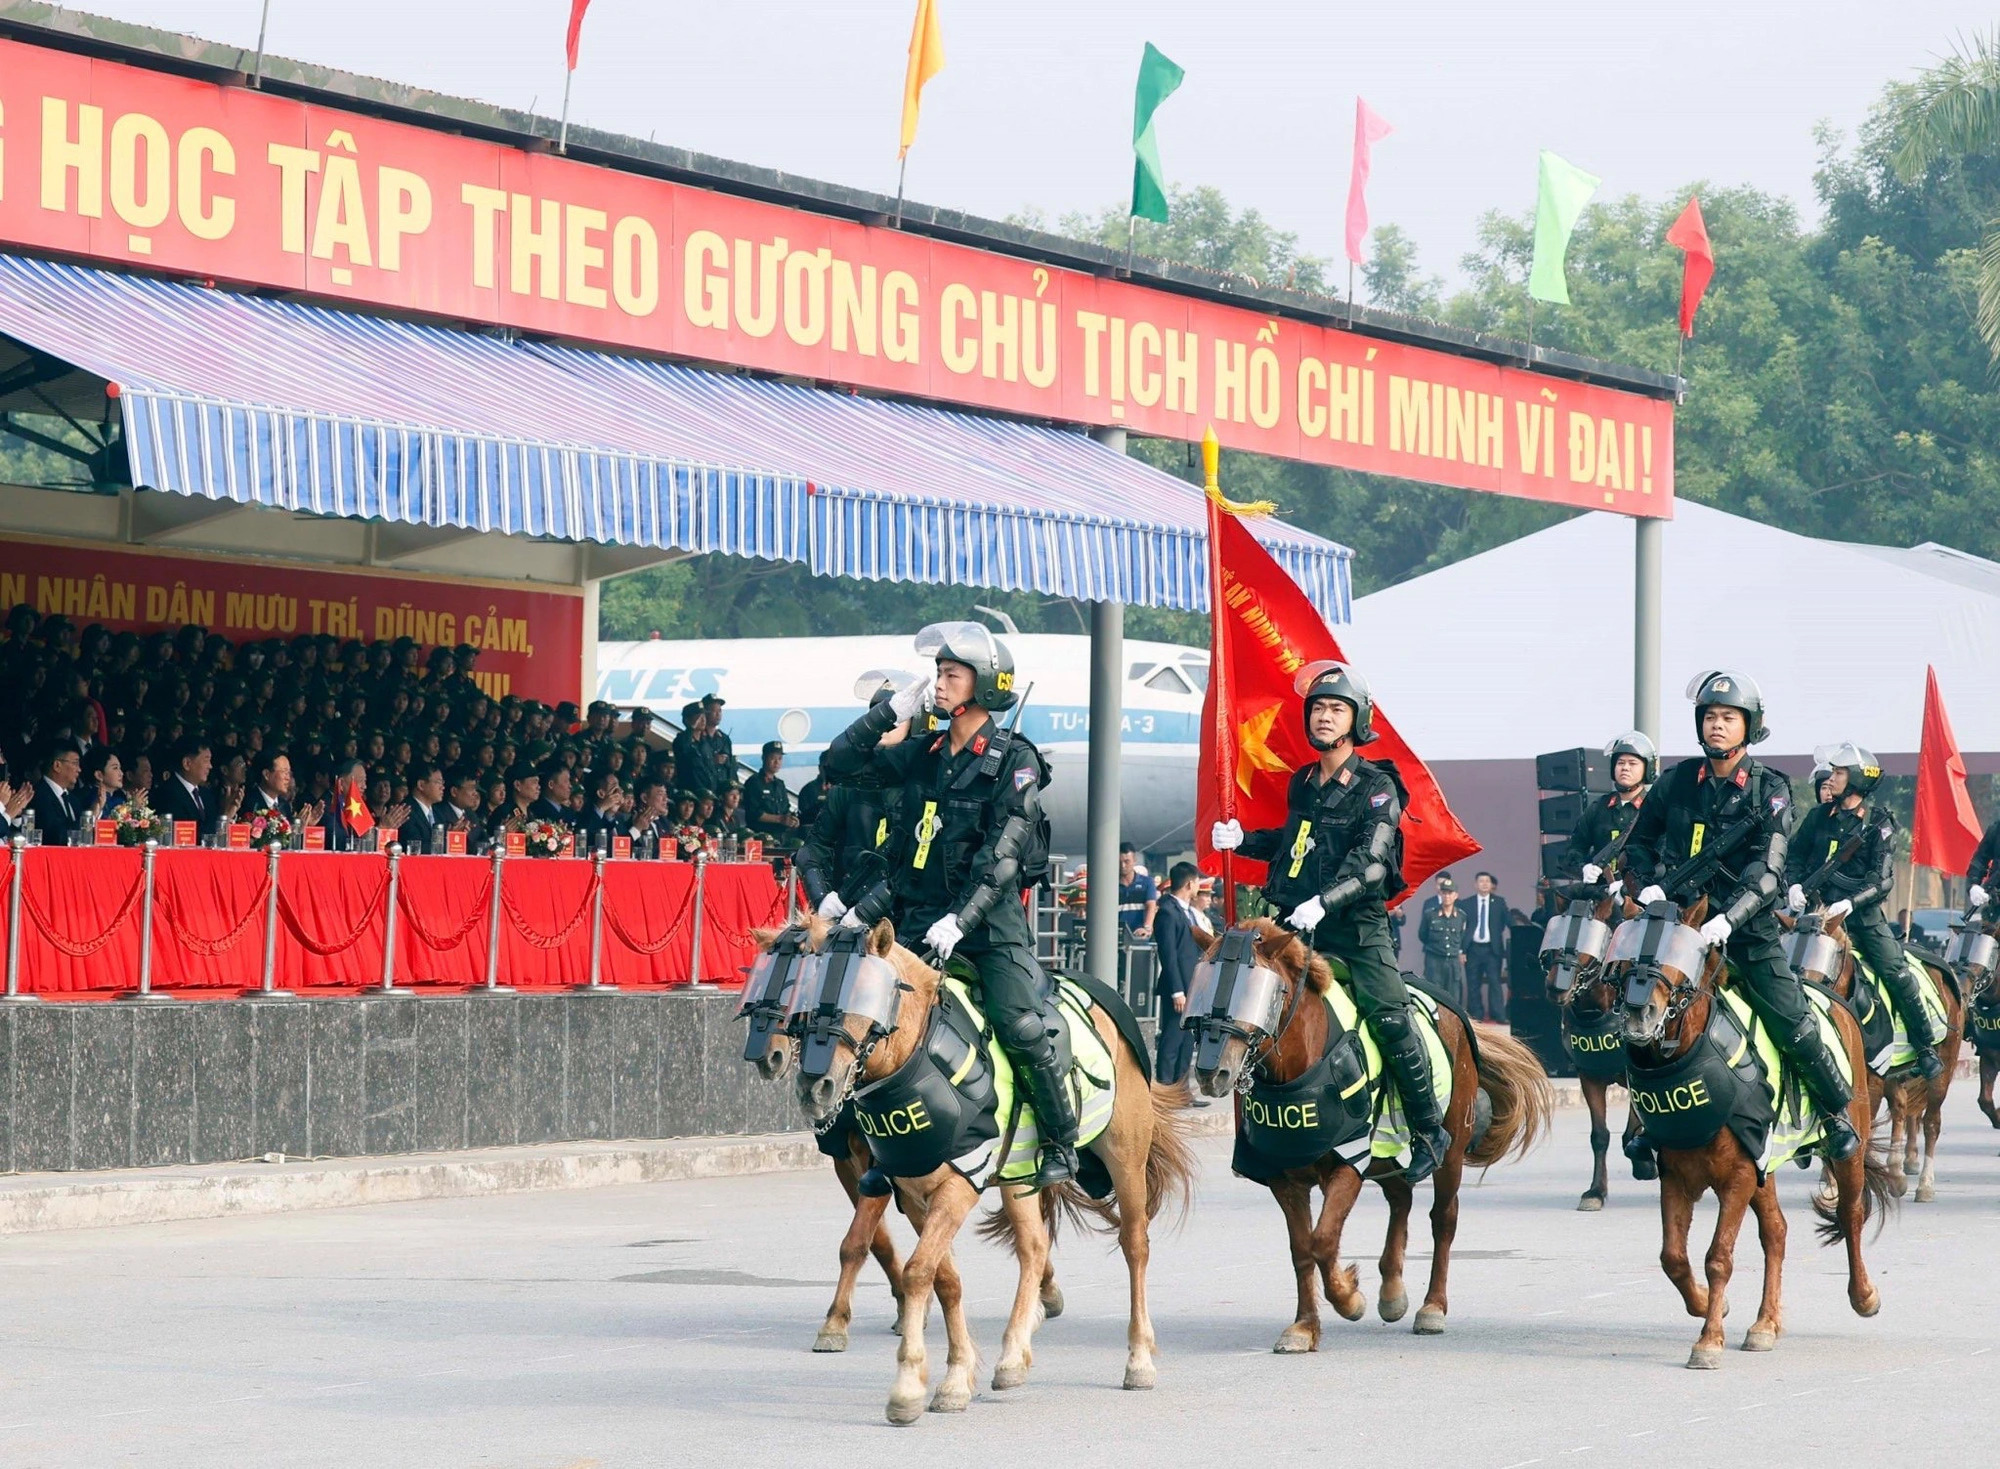 A parade by the mounted police force. Photo: Vietnam News Agency